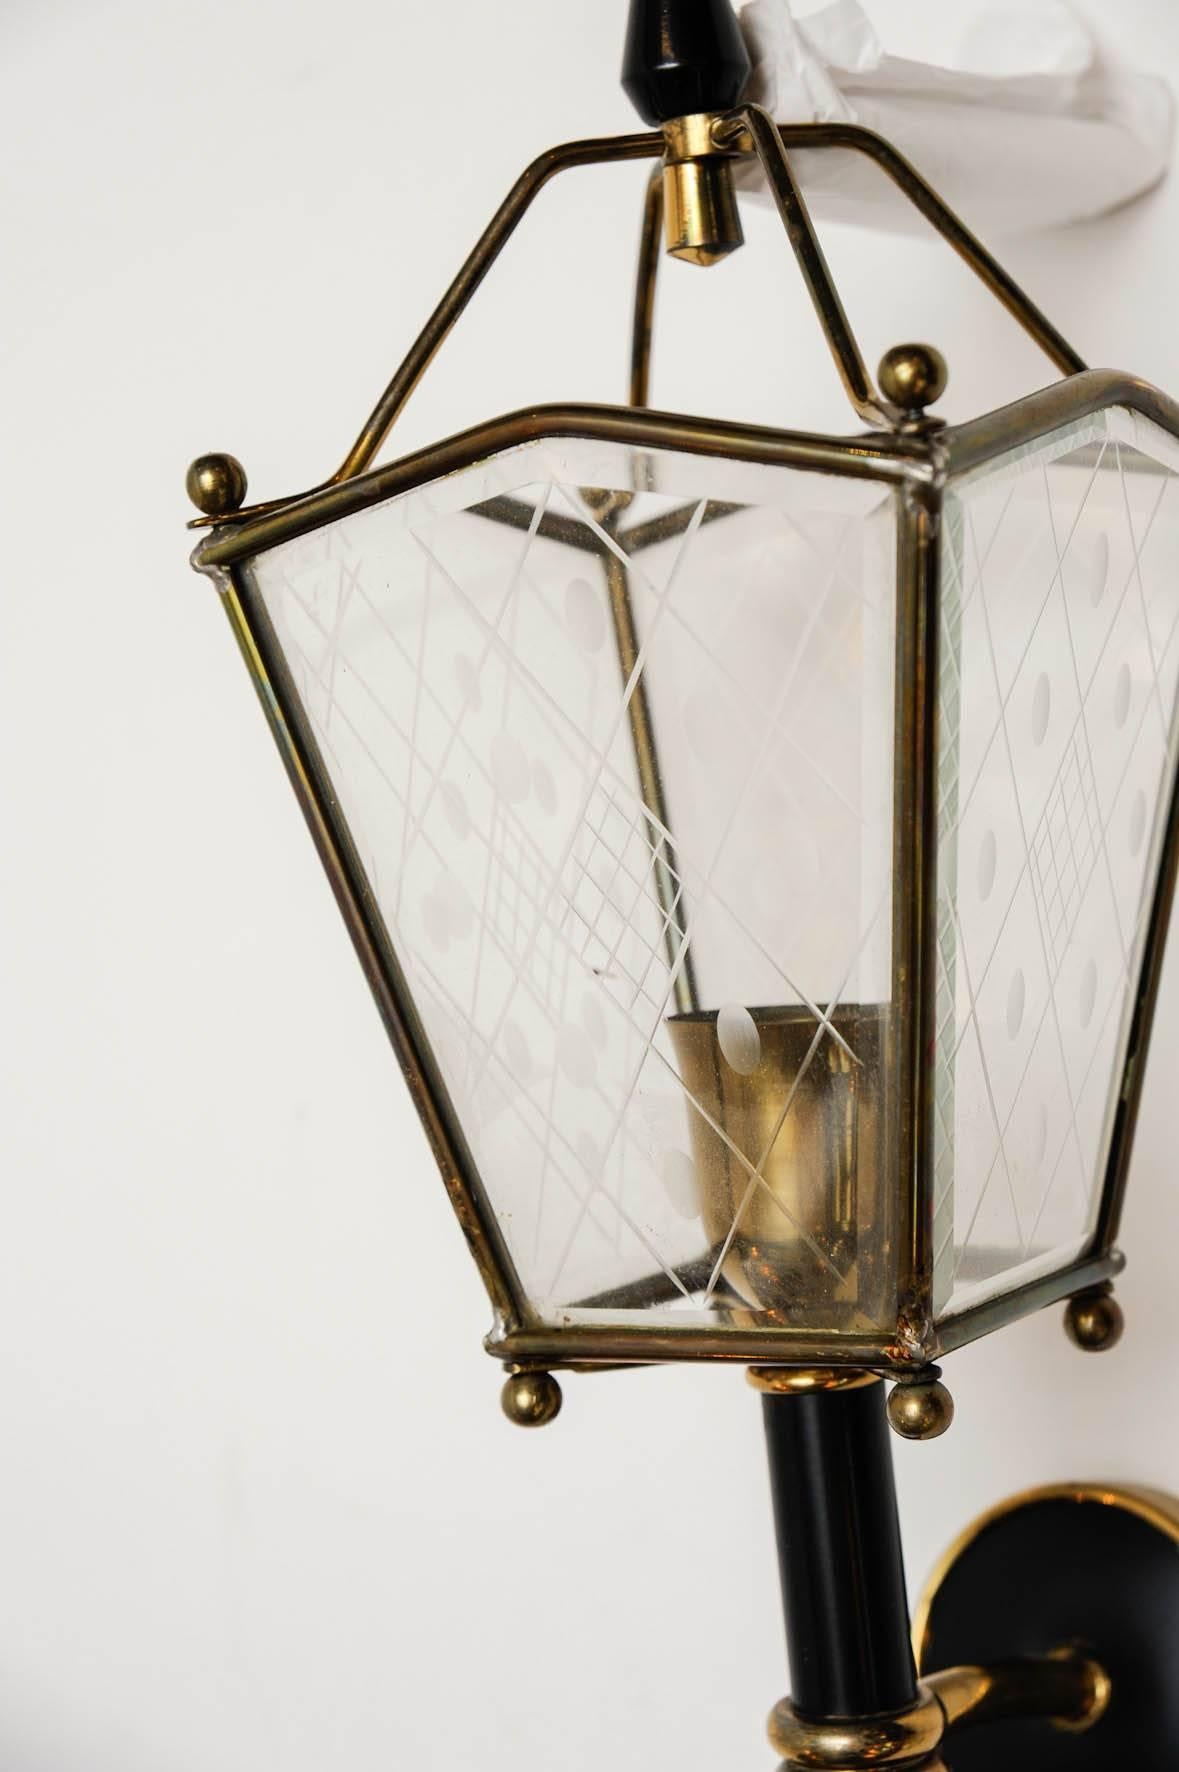 Mid-20th Century Pair of Black Metal, Brass and Glass Lantern Wall Sconces